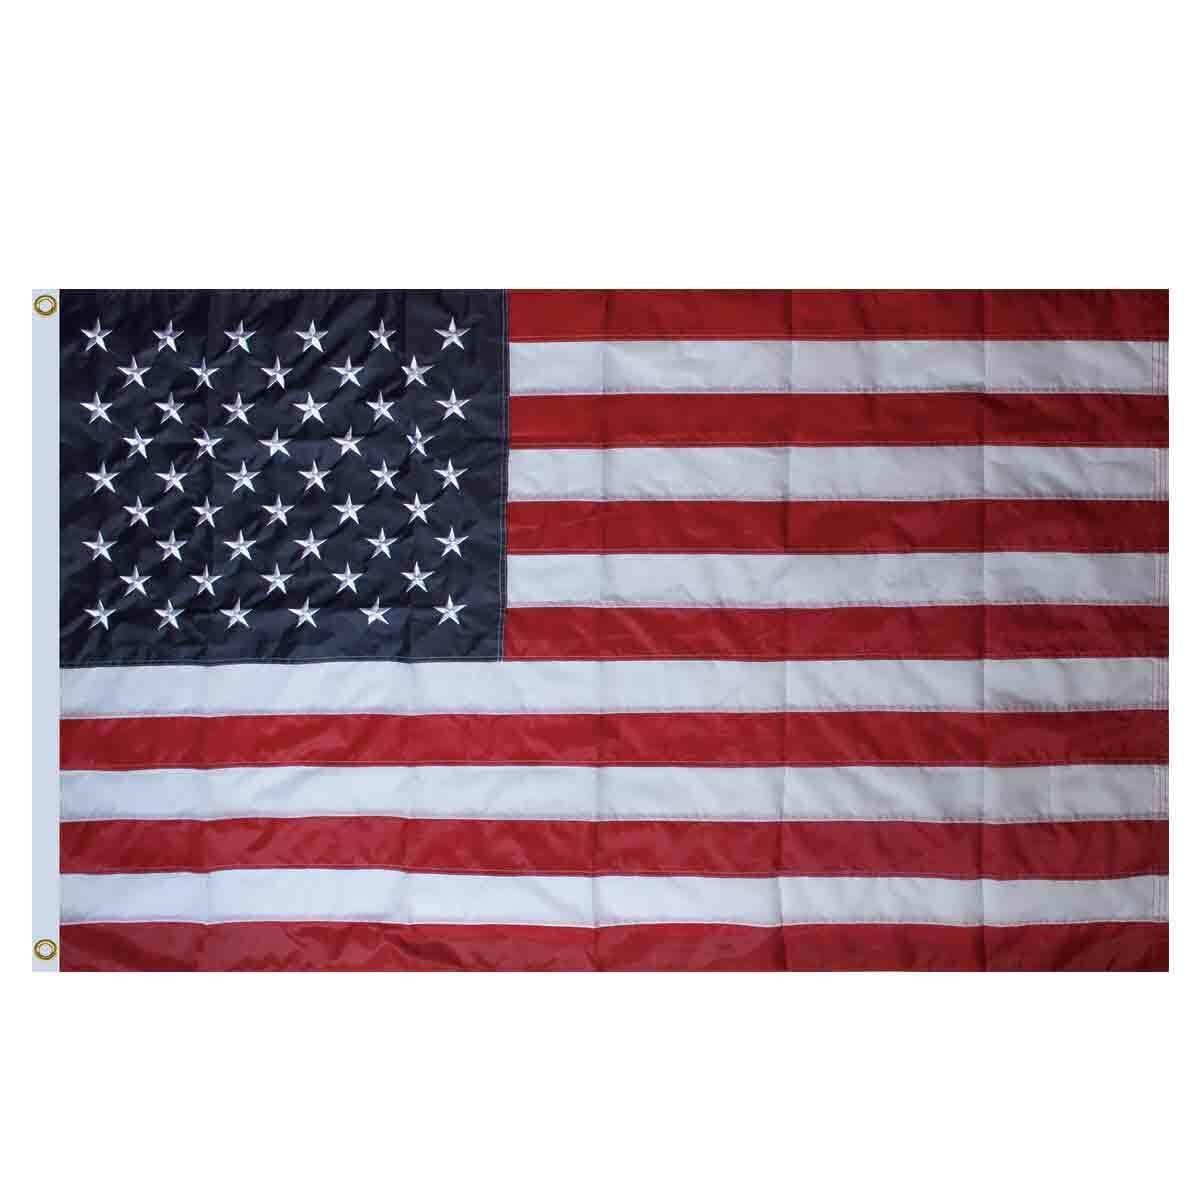 American Flag - 3' x 5' With Grommets